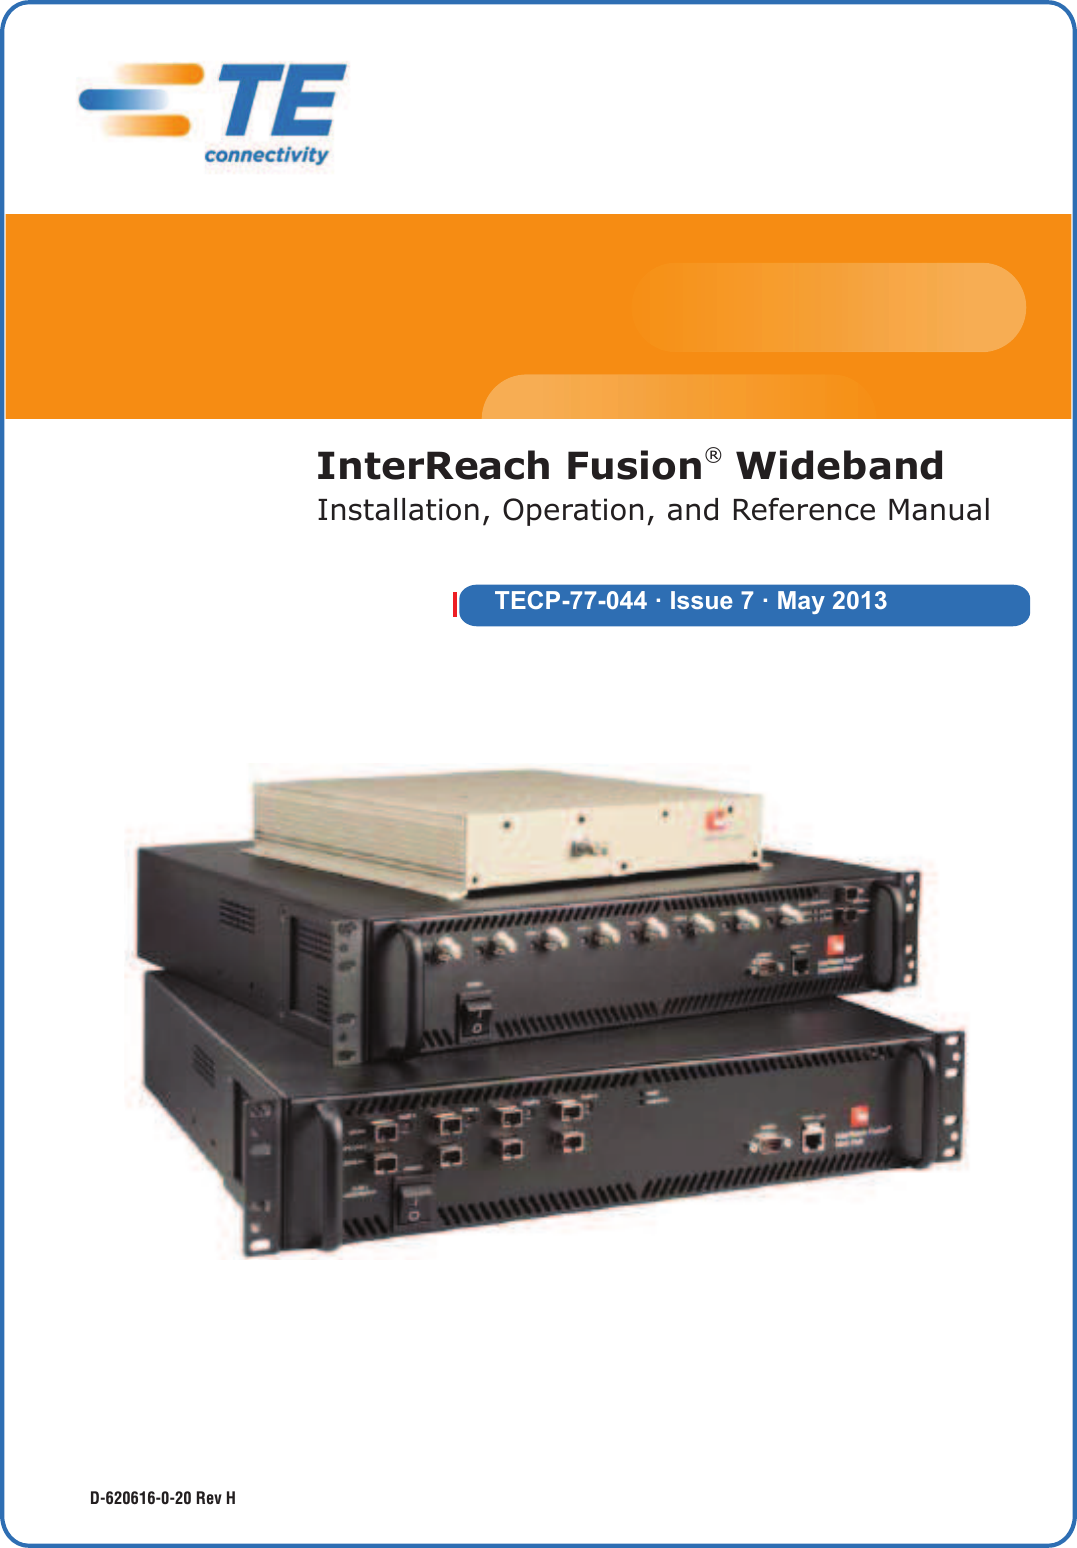 TECP-77-044 · Issue 7 · May 2013D-620616-0-20 Rev HInterReach Fusion® WidebandInstallation, Operation, and Reference Manual